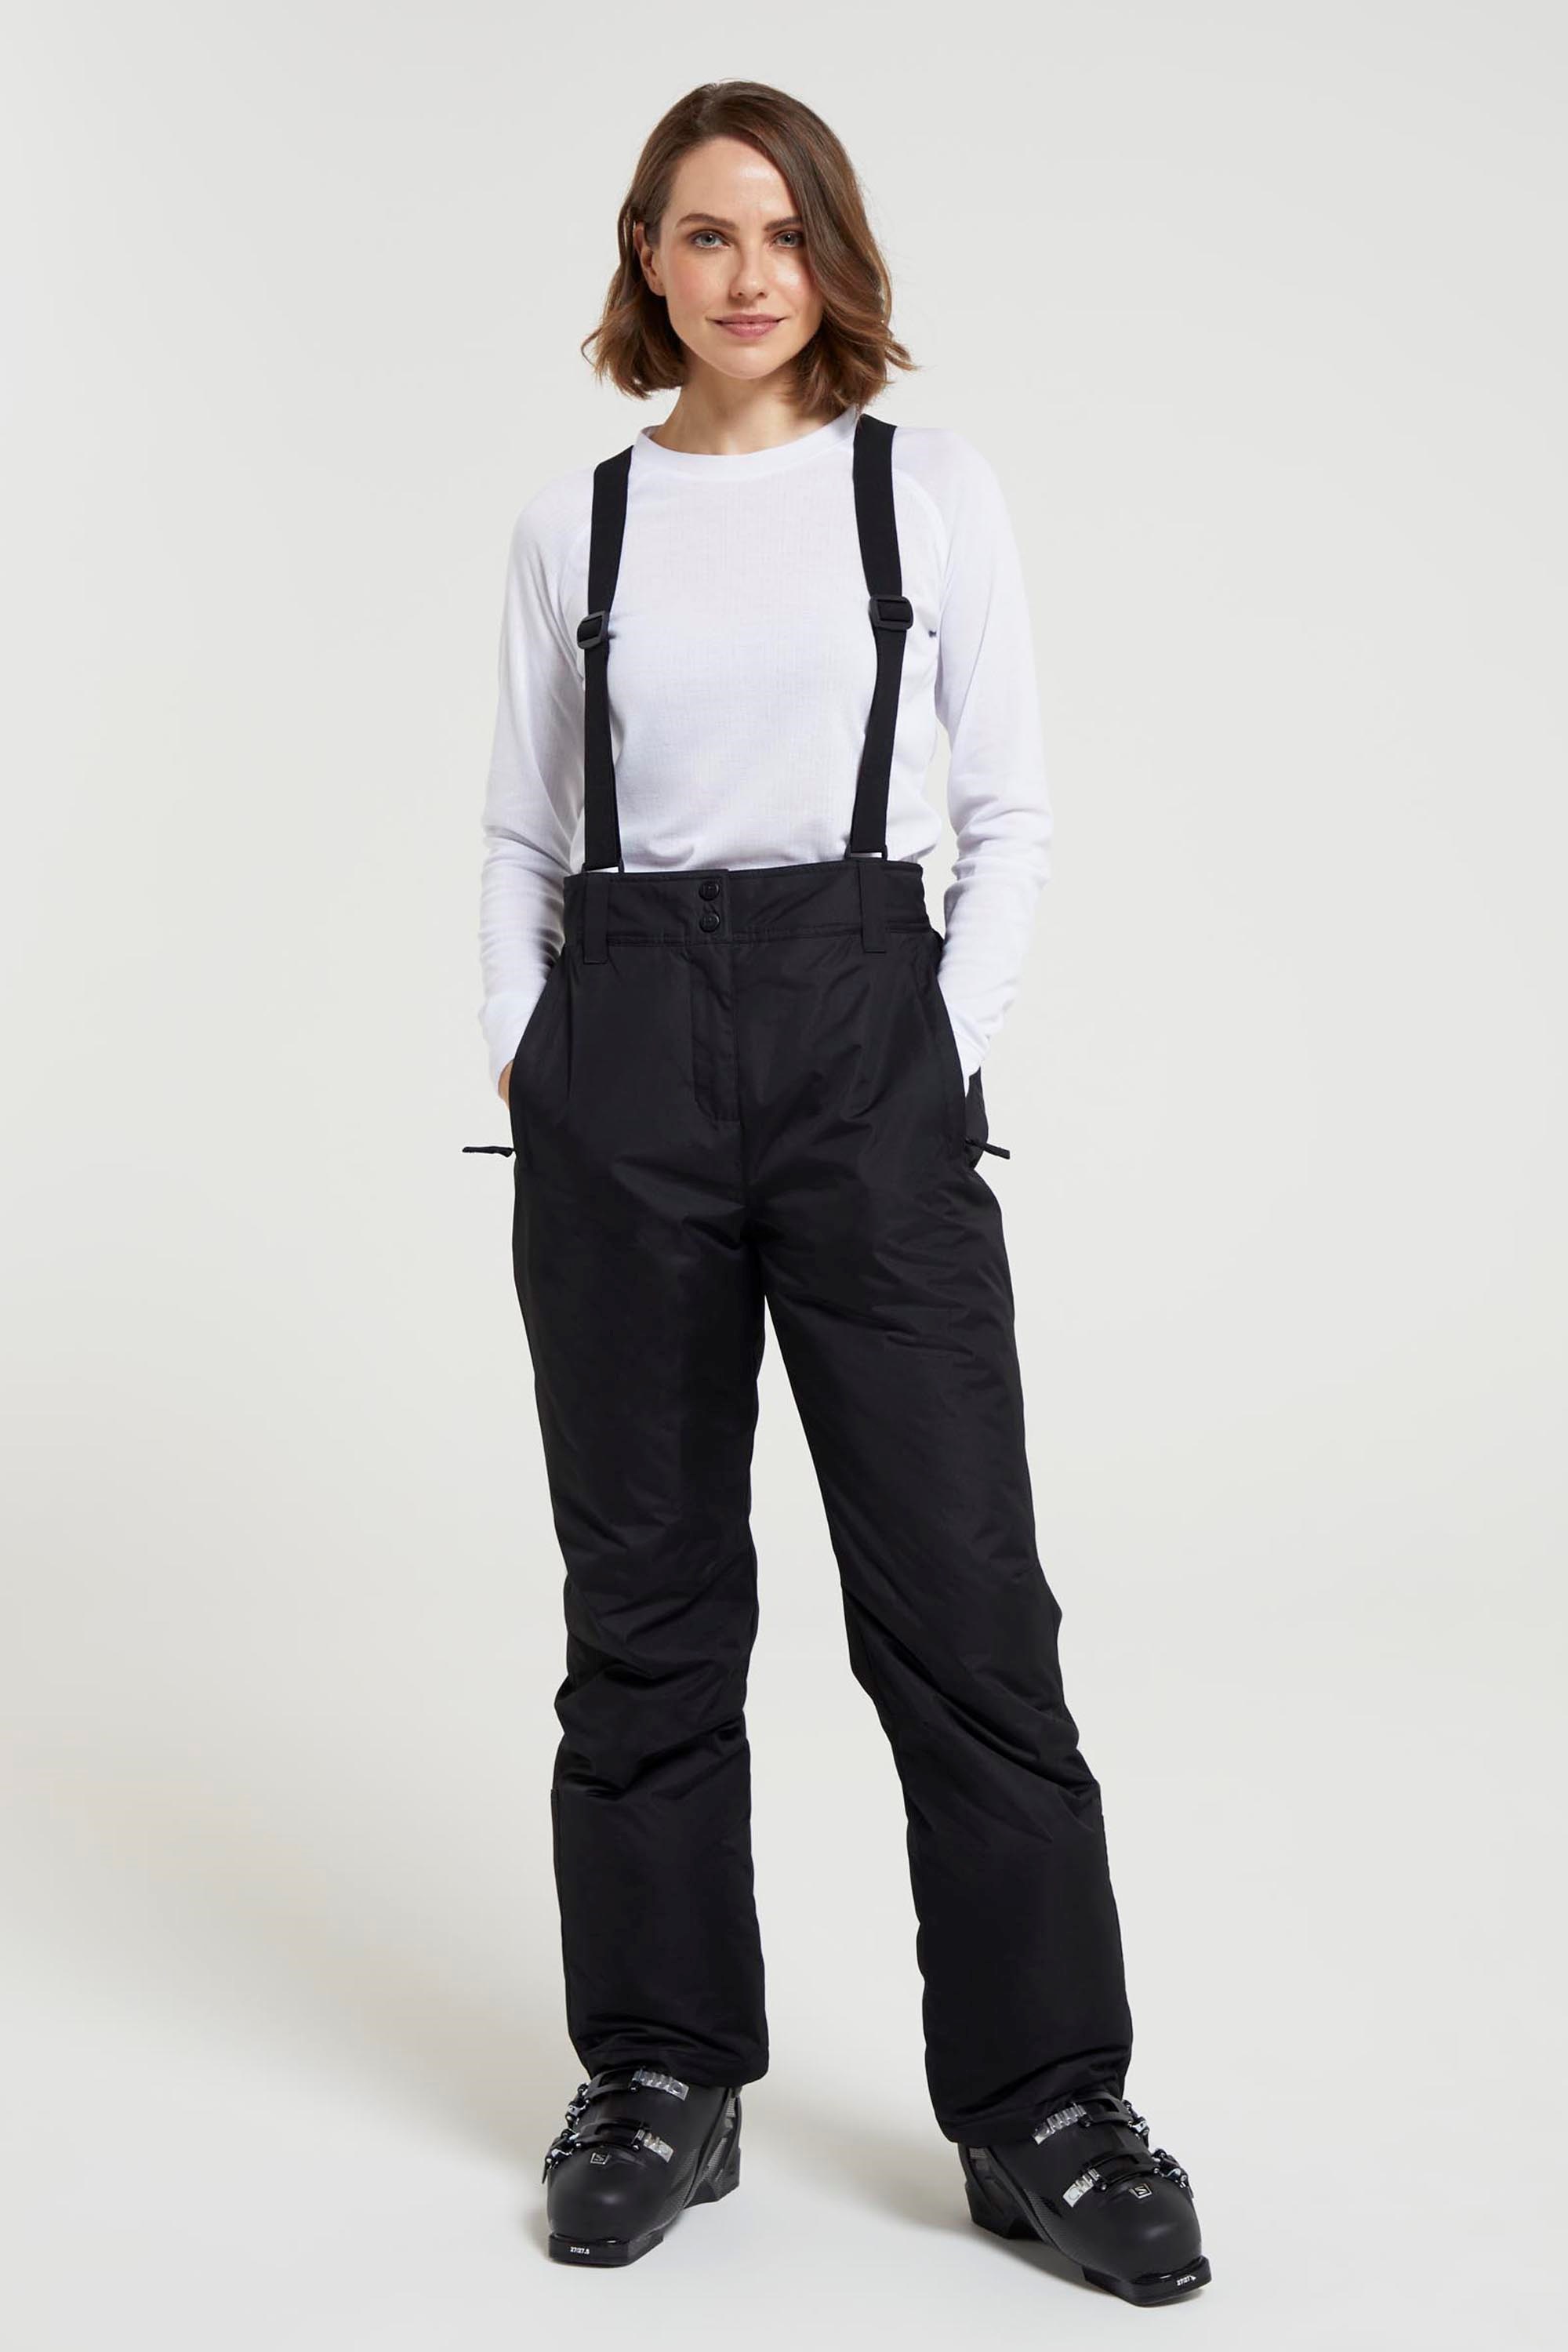 Short and wide trousers lady - Jeans - Oddsailor.com